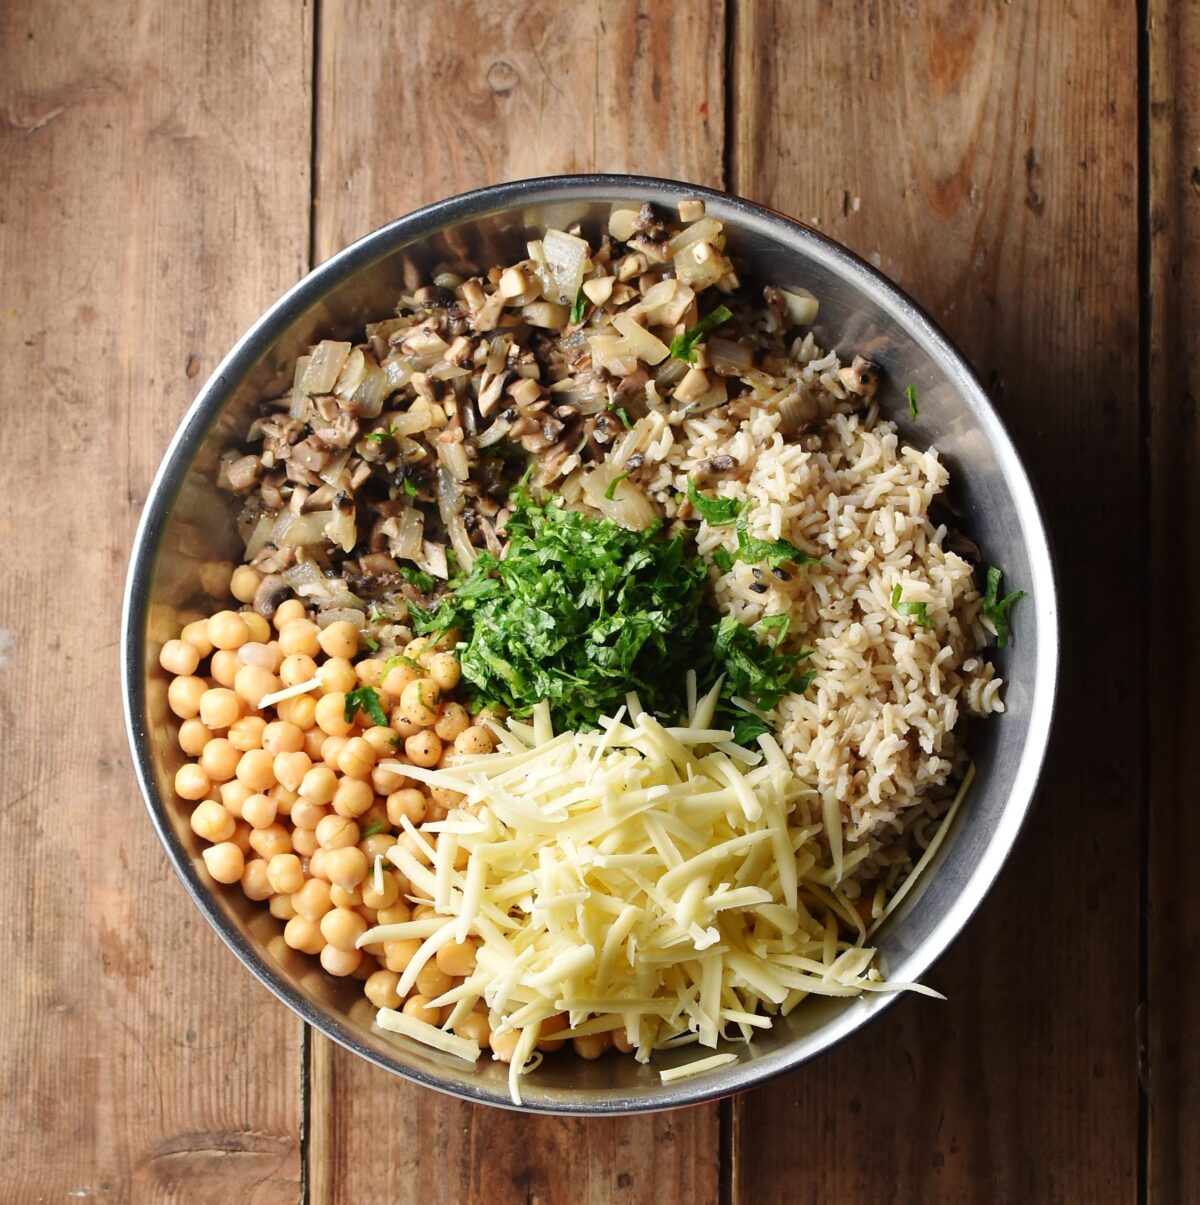 Chickpeas, mushrooms, brown rice, grated cheese and chopped herbs in large metal bowl.